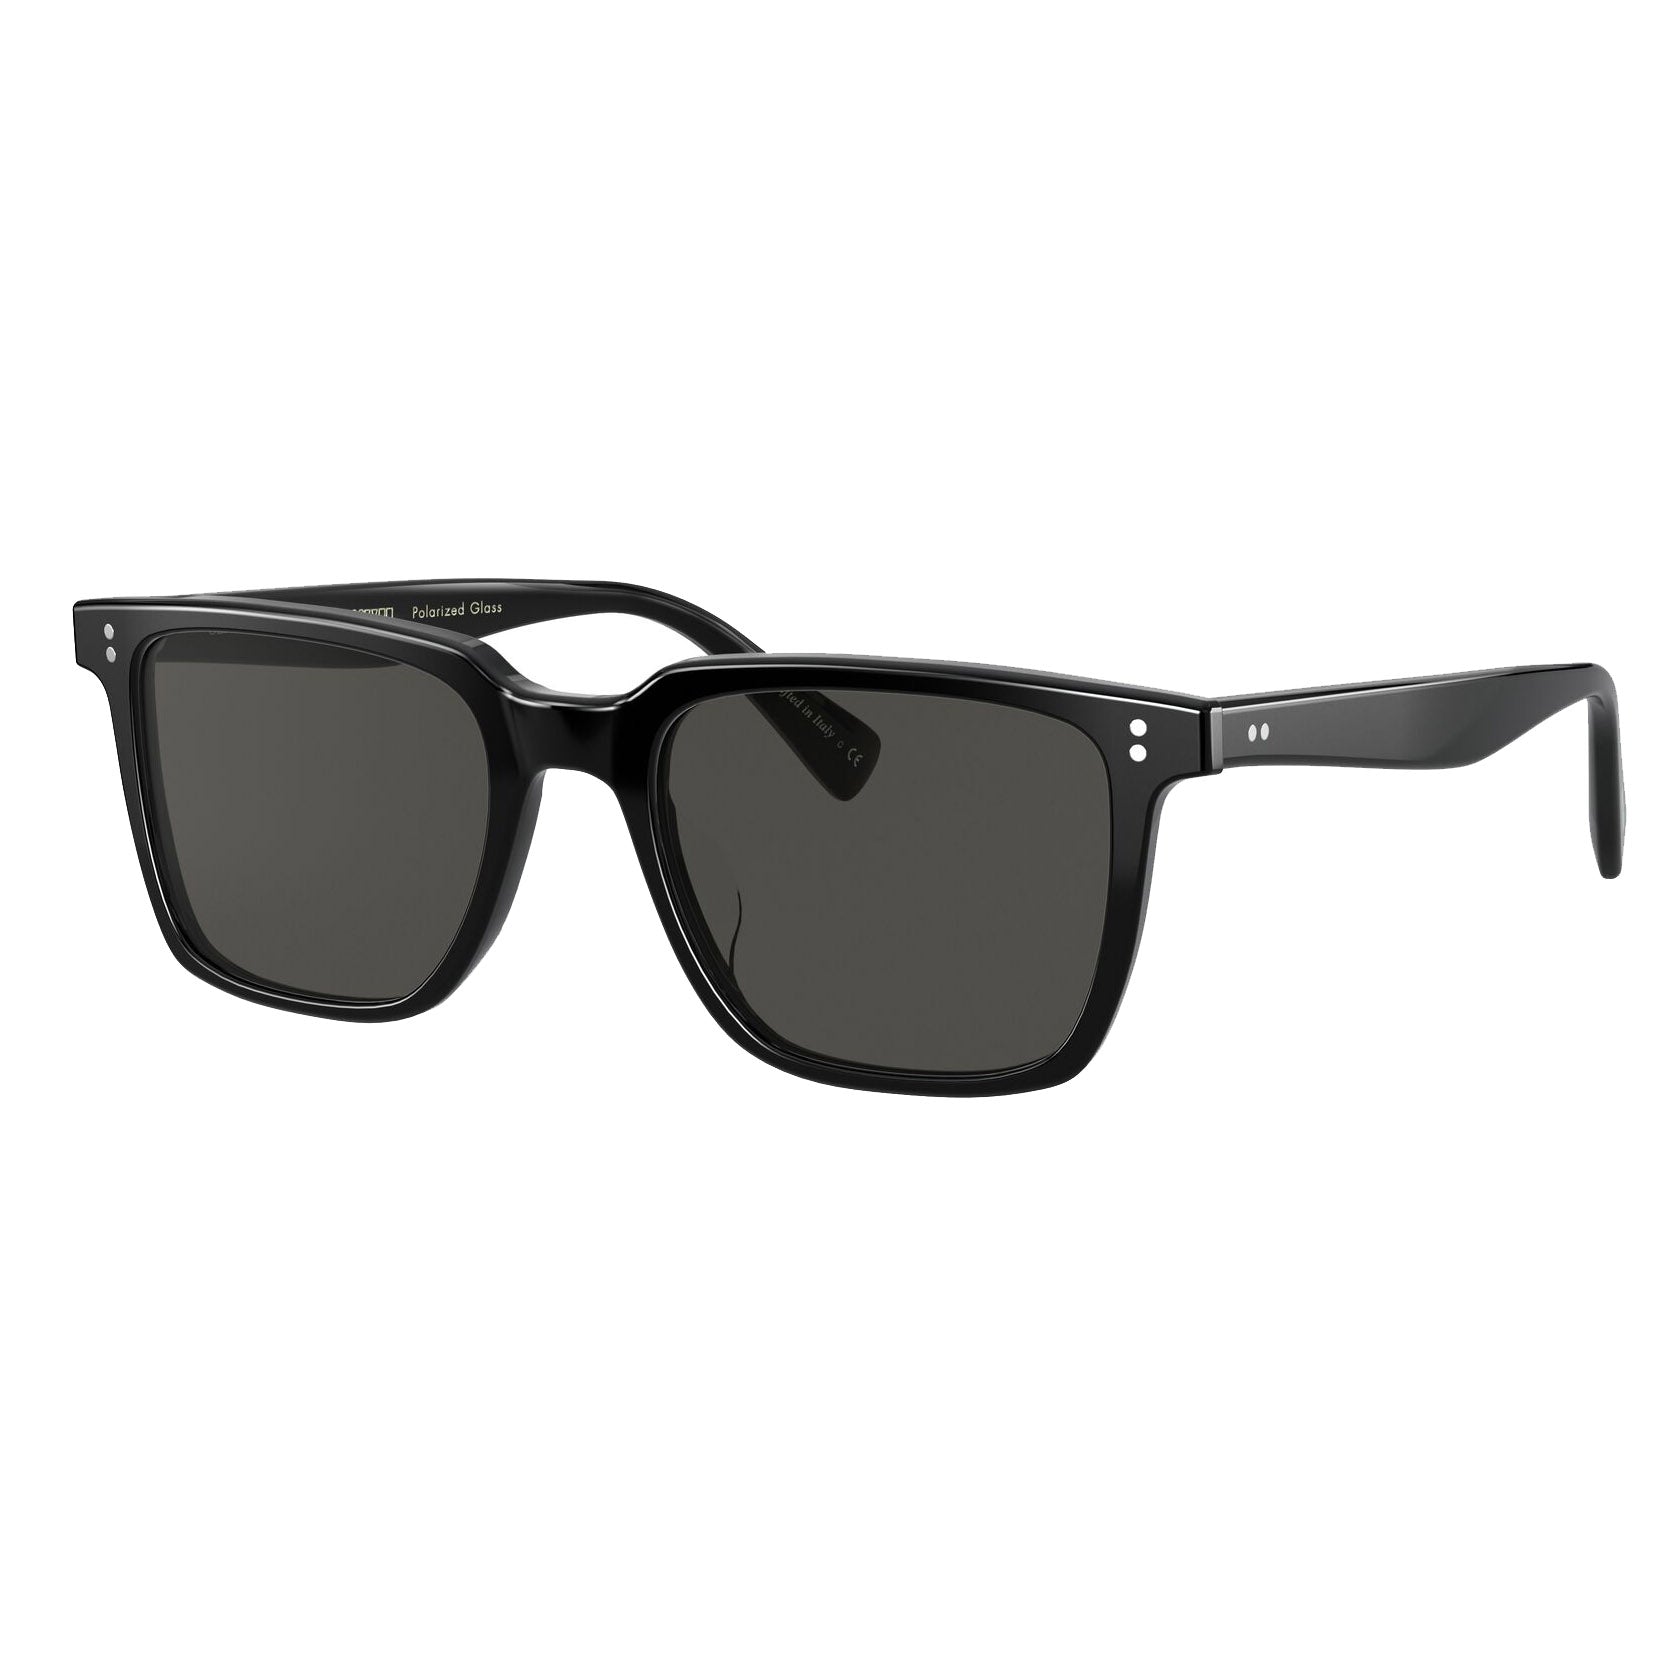 Oliver Peoples Lachman Sun Black with Midnight Express Polar Sunglasses